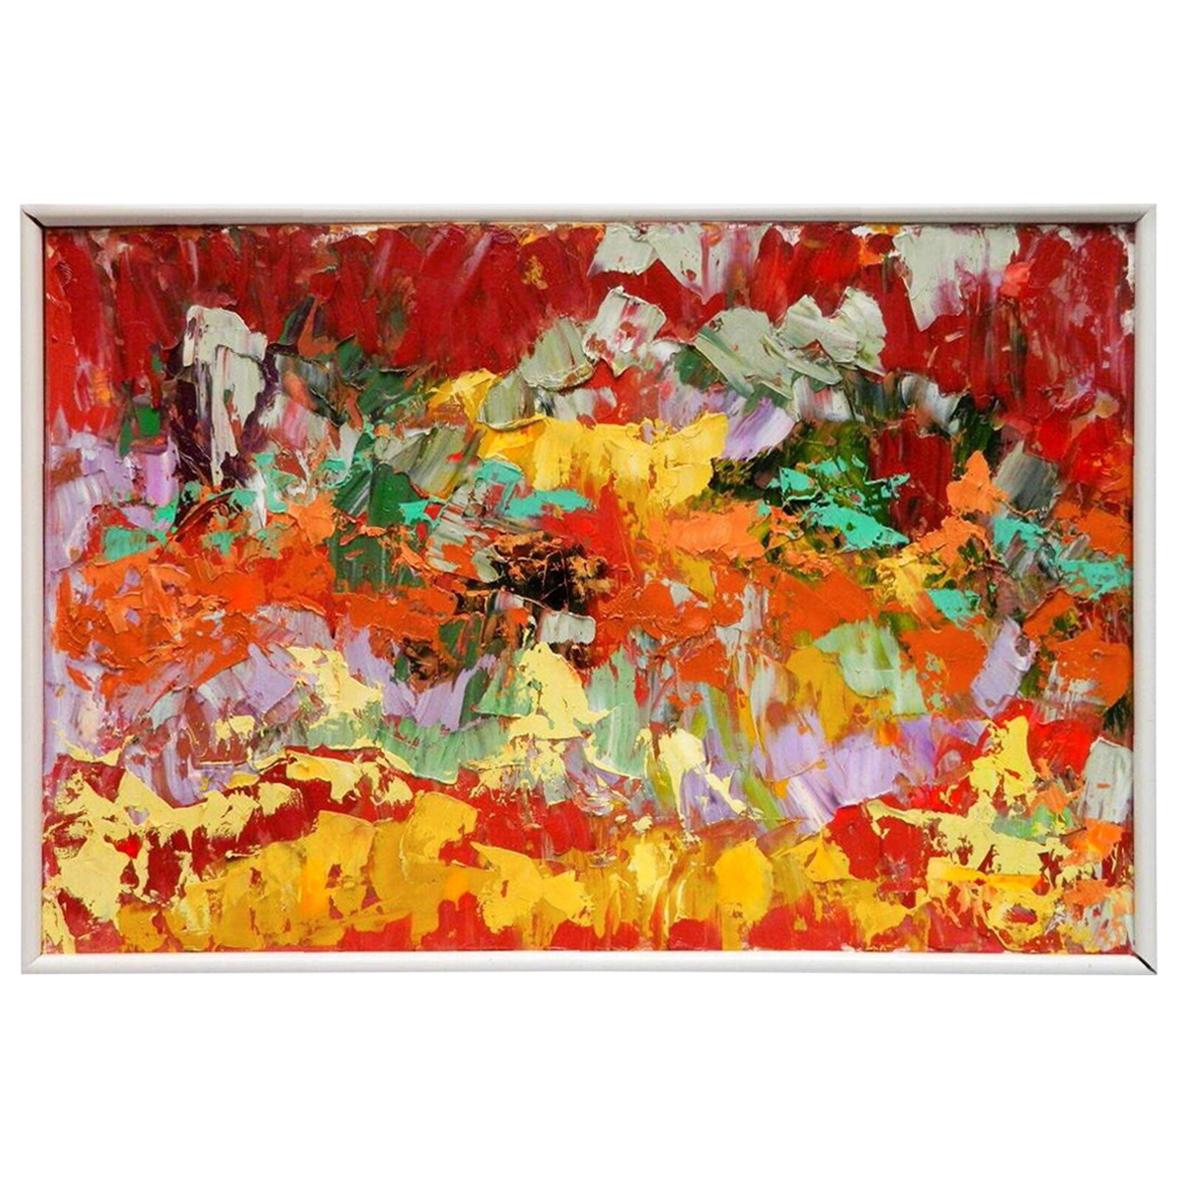 Postmodern Abstraction oil on canvas, Arnold Schreibman, 1991, Red yellow green